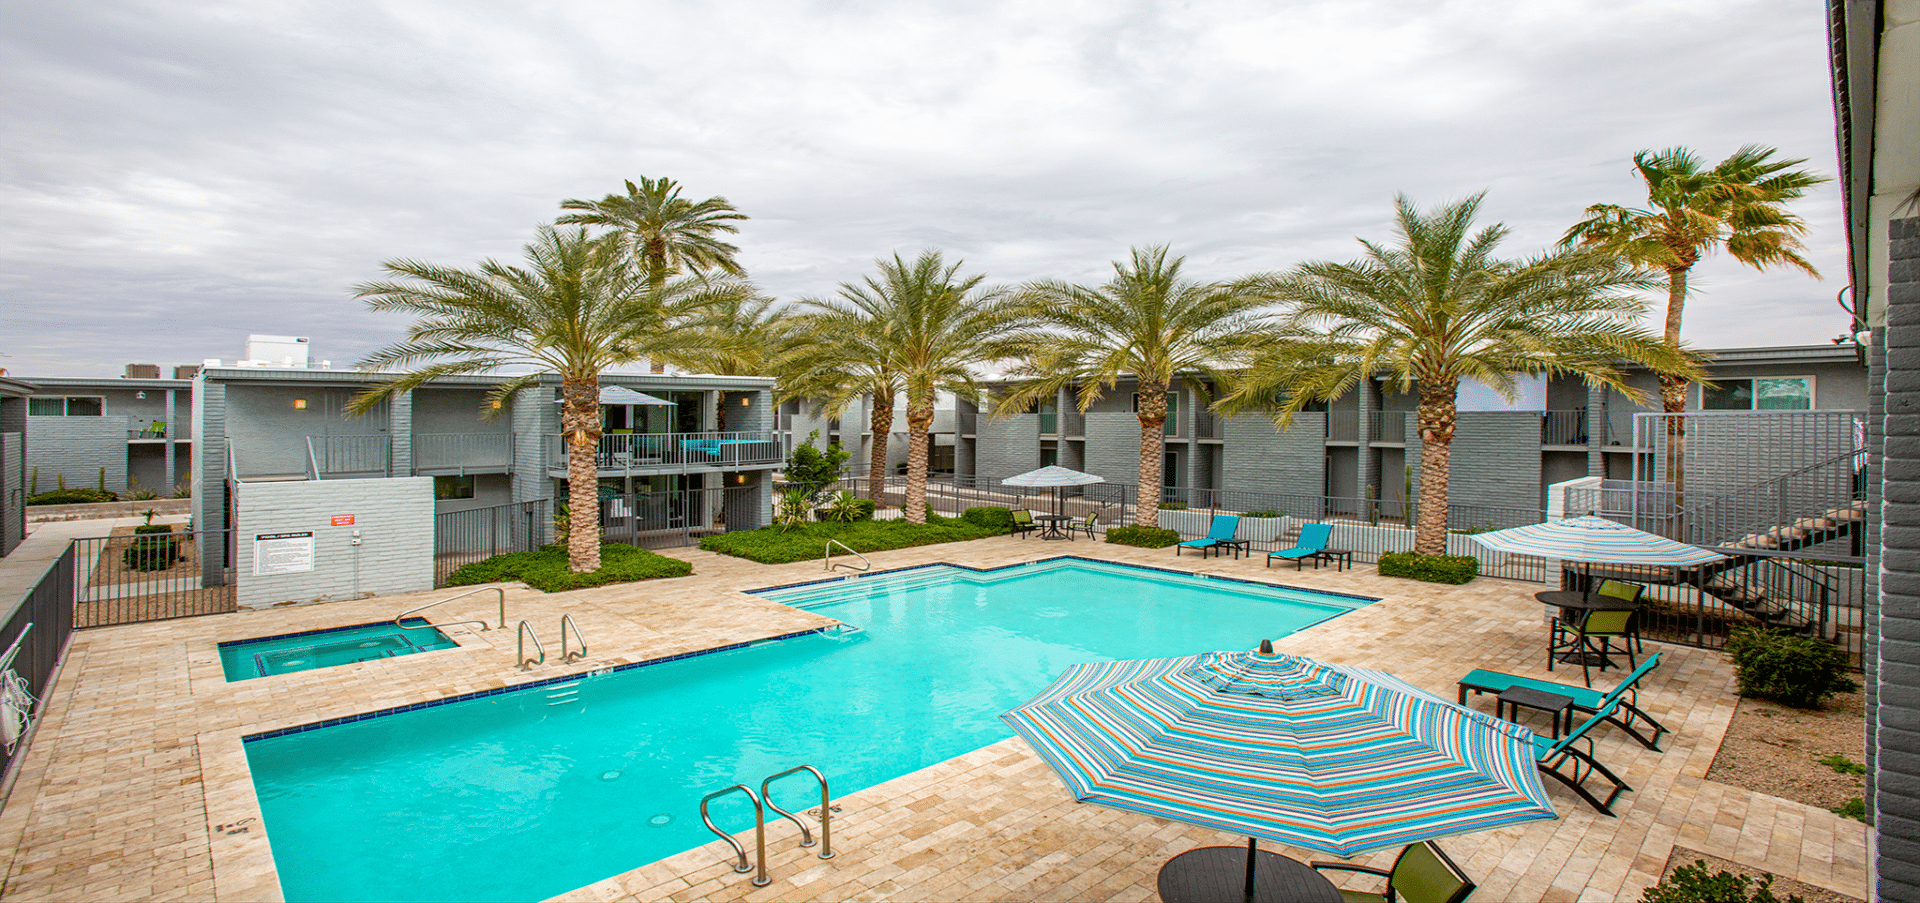 The pool courtyard GC Square apartments sold by Caliber